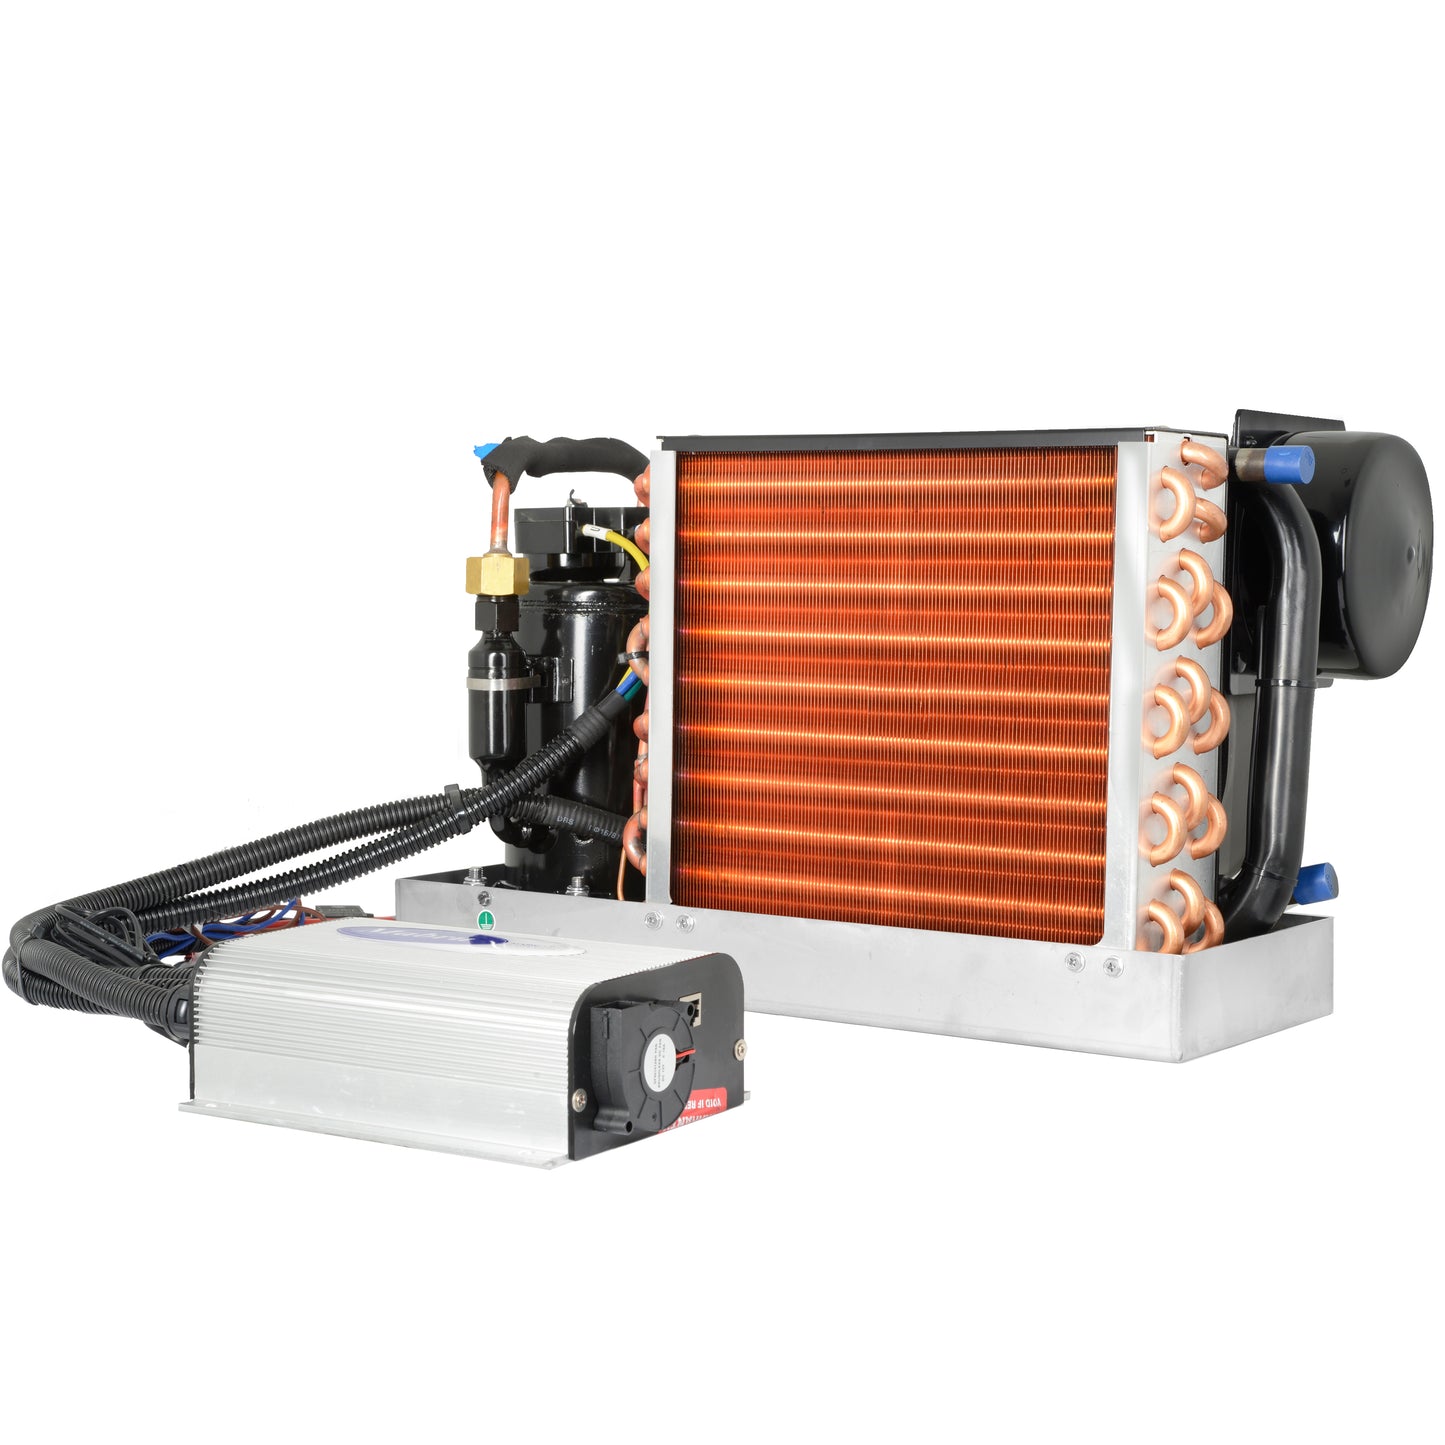 CURRENTLY OUT OF STOCK. FOR PRE-ORDER ONLY**MARINE AIR CONDITIONER SC 12000 BTU 12V DC (COPPER) by MABRU